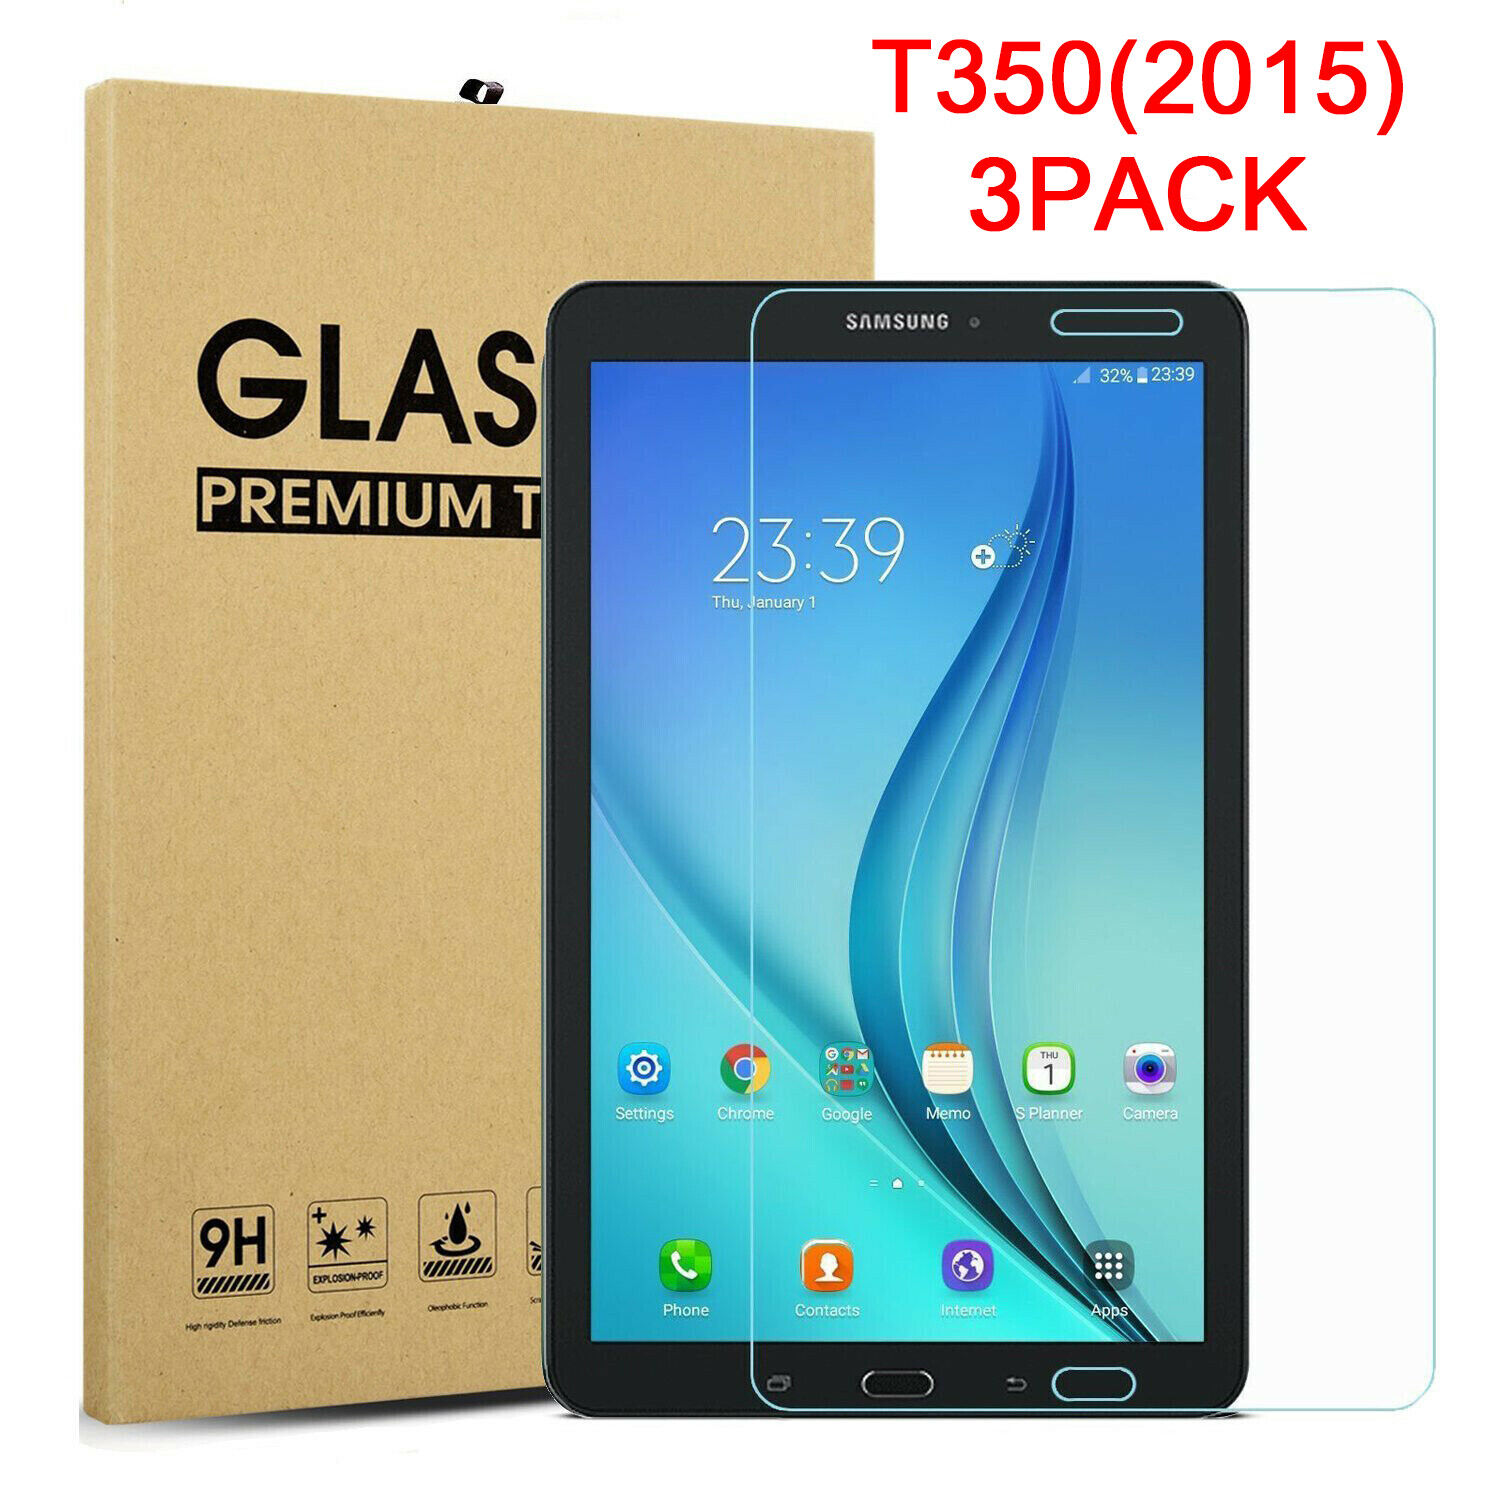 3x For Samsung Galaxy Tab A 8.0 2015 T350 T355 Tempered Glass Screen Protector 